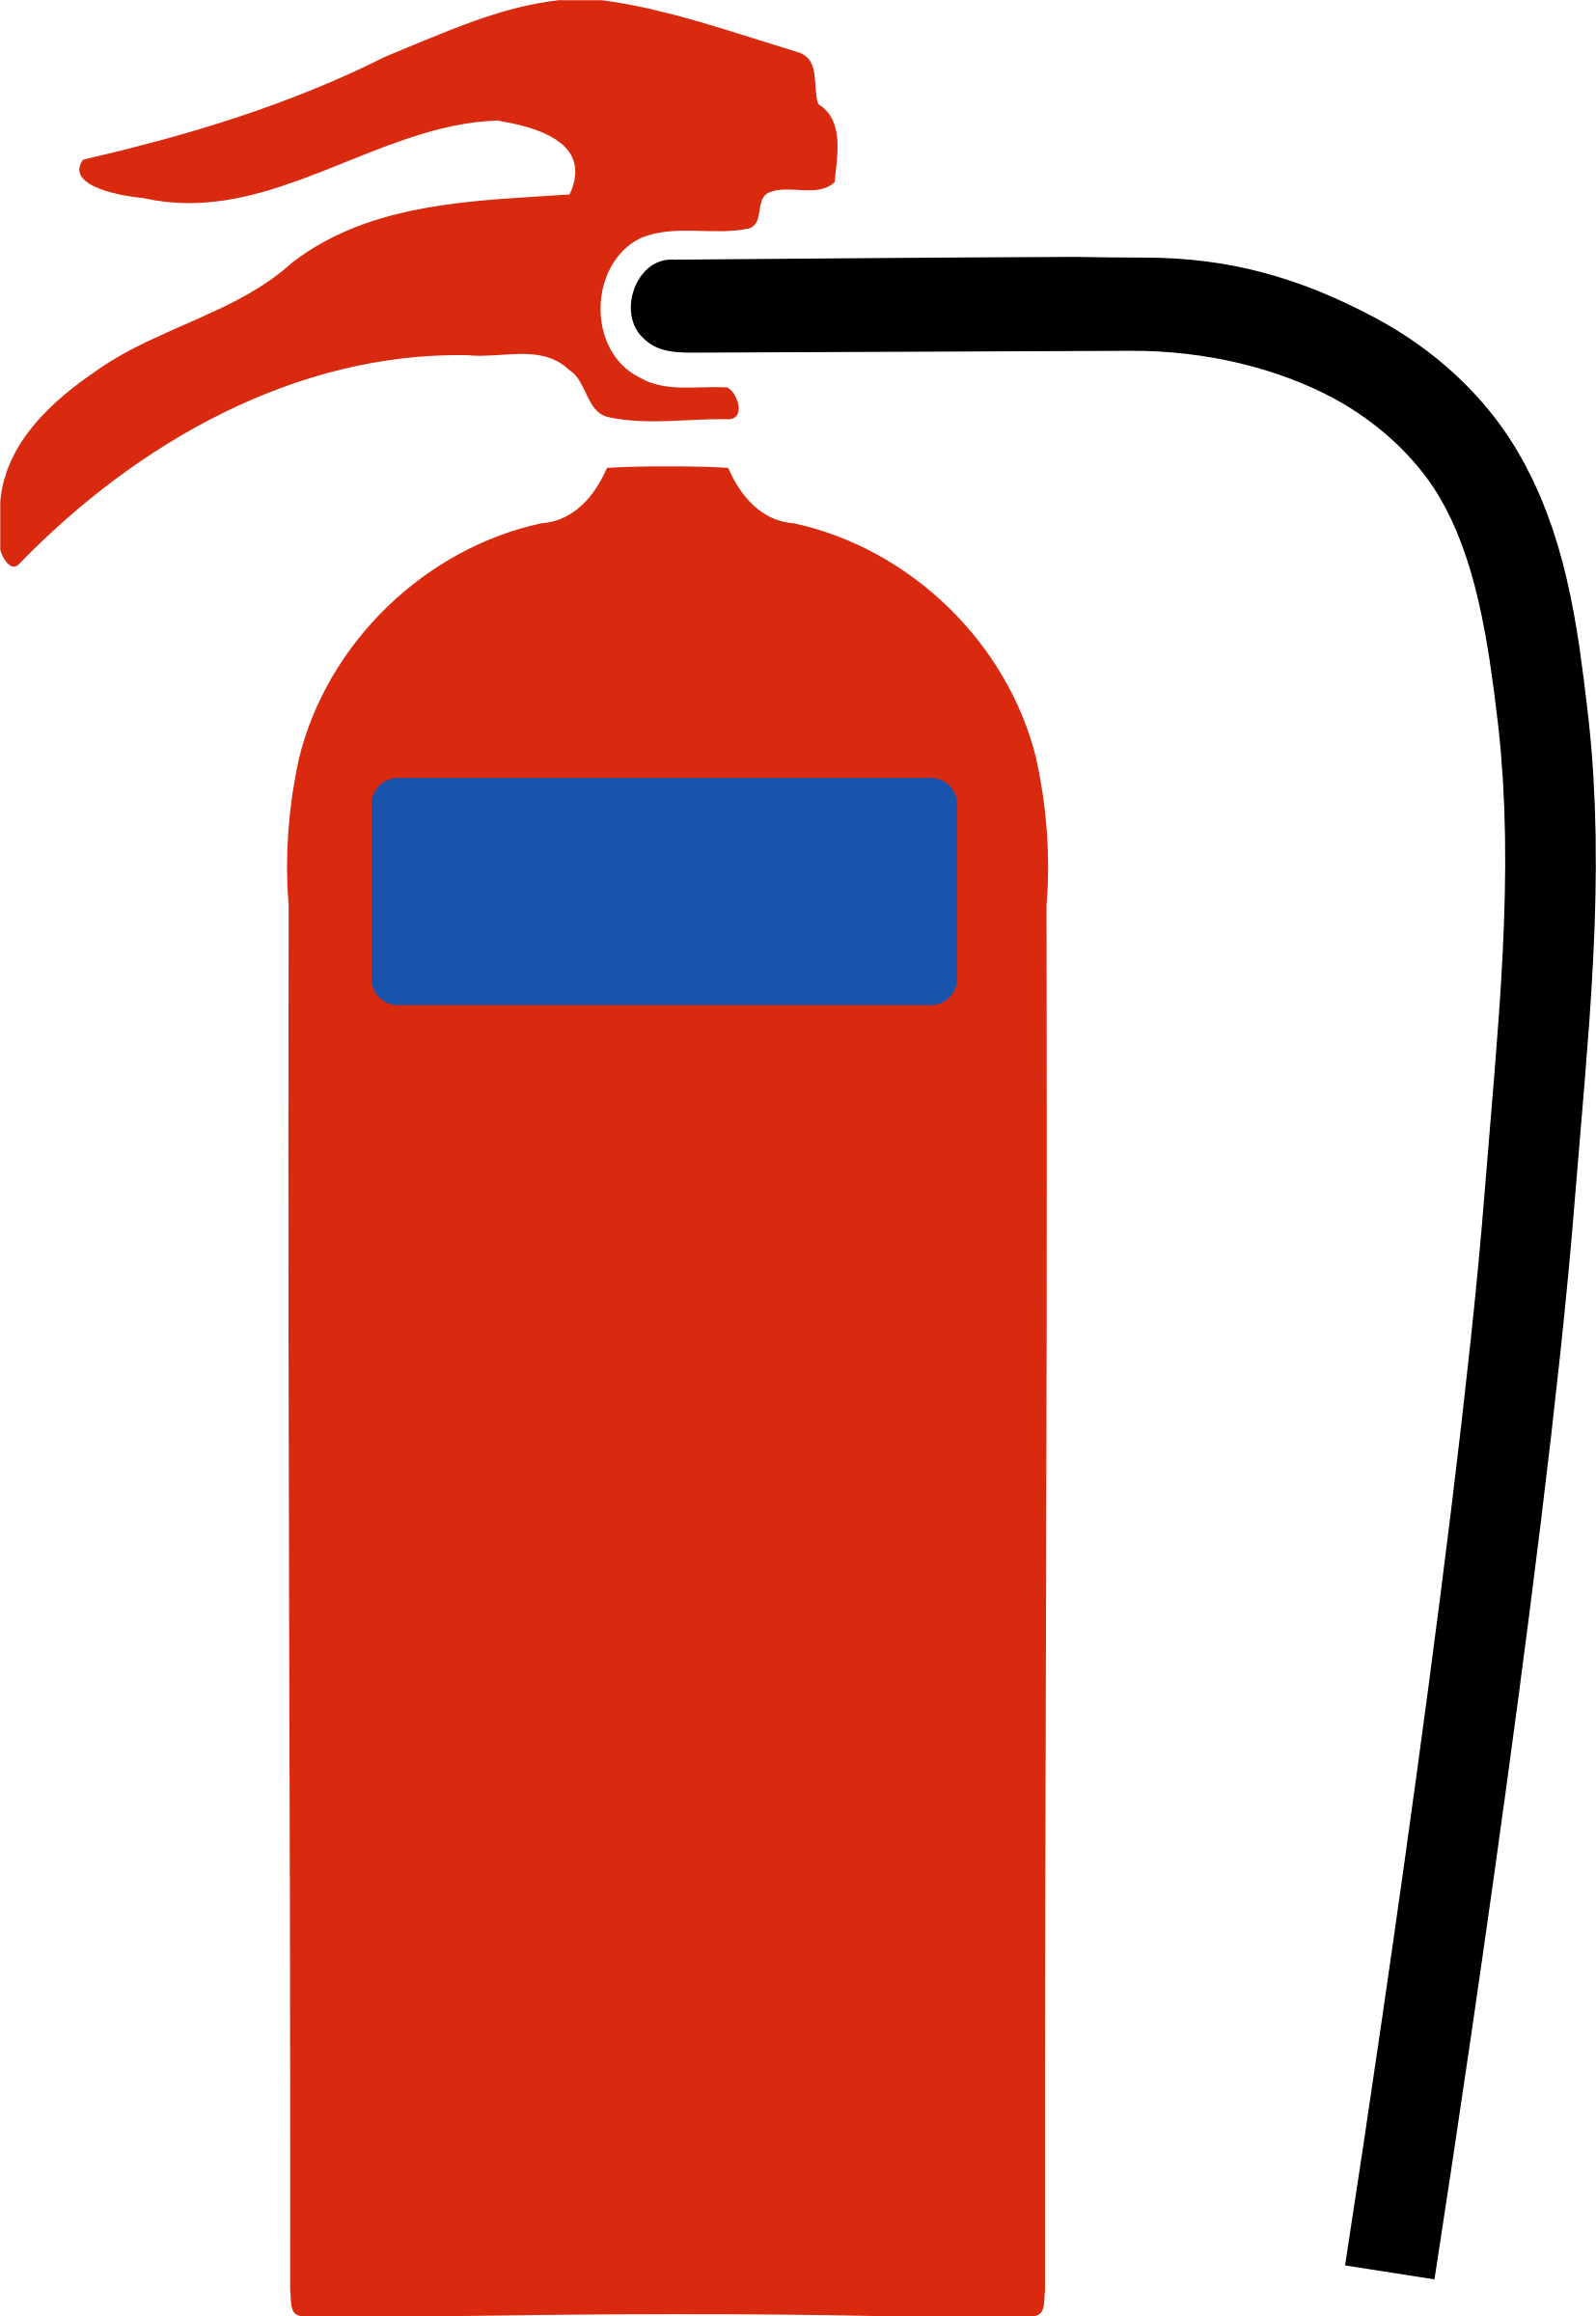 Big Image - Fire Extinguisher Icon Png (1654x2400)